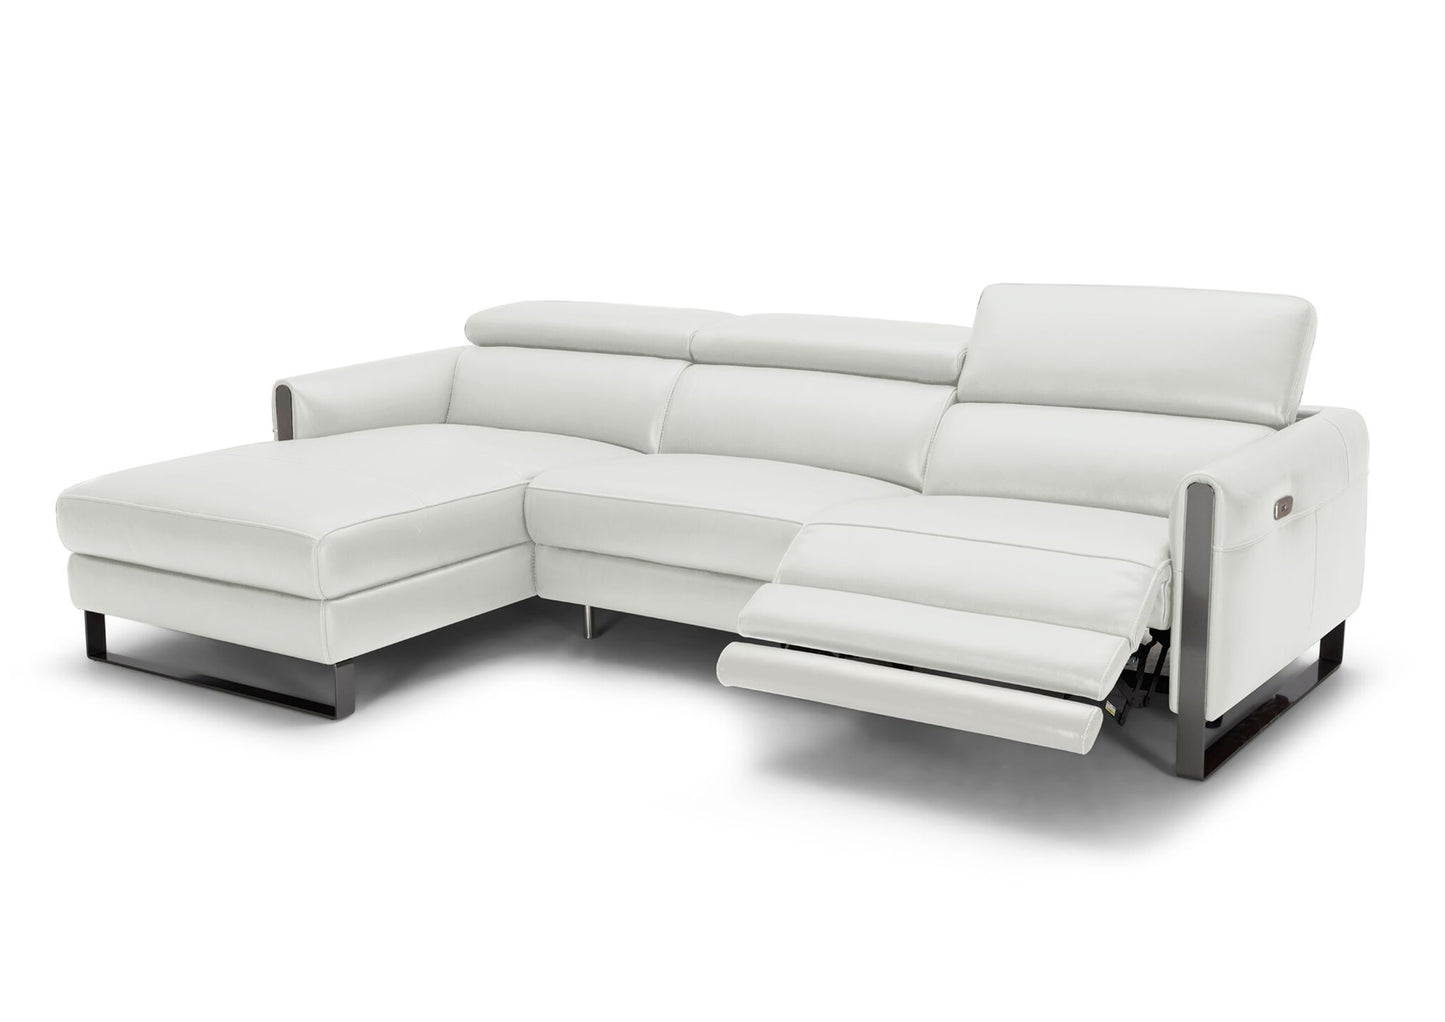 Vella Leather Sectional Sofa Light Grey LHF by JM